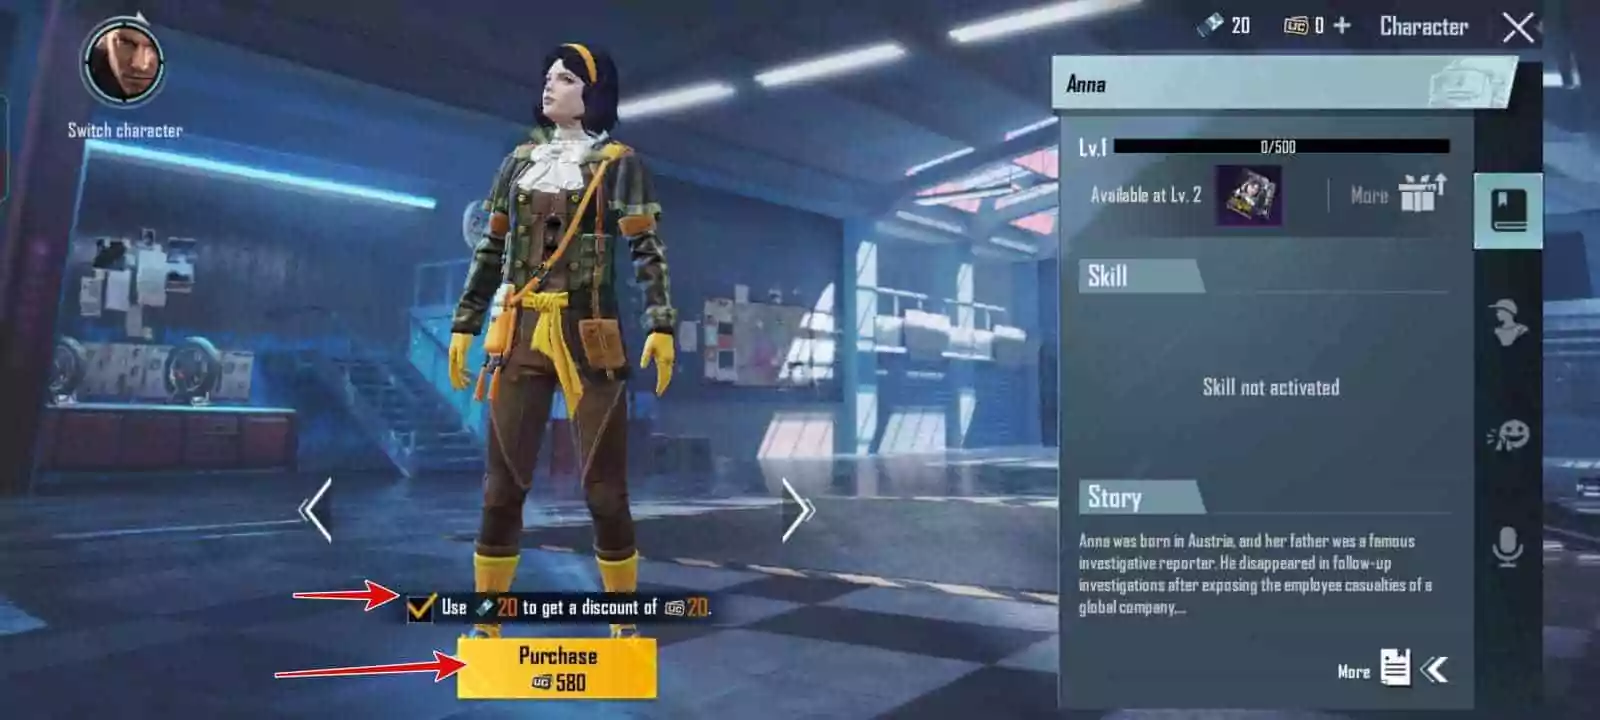 Use the arrow to change character > Click Purchase”></li>



<li>If you have sufficient Voucher, the chosen character will be unlocked</li>
</ol>



<p>This is how one can unlock and get free characters in BGMI as well as PUBG Mobile. You can look for more events like this and some of the free characters by using this character’s voucher card. In case you have any issues, please let us know in the below comments. </p>
<!-- AI CONTENT END 1 -->
		</div>

		<div class=